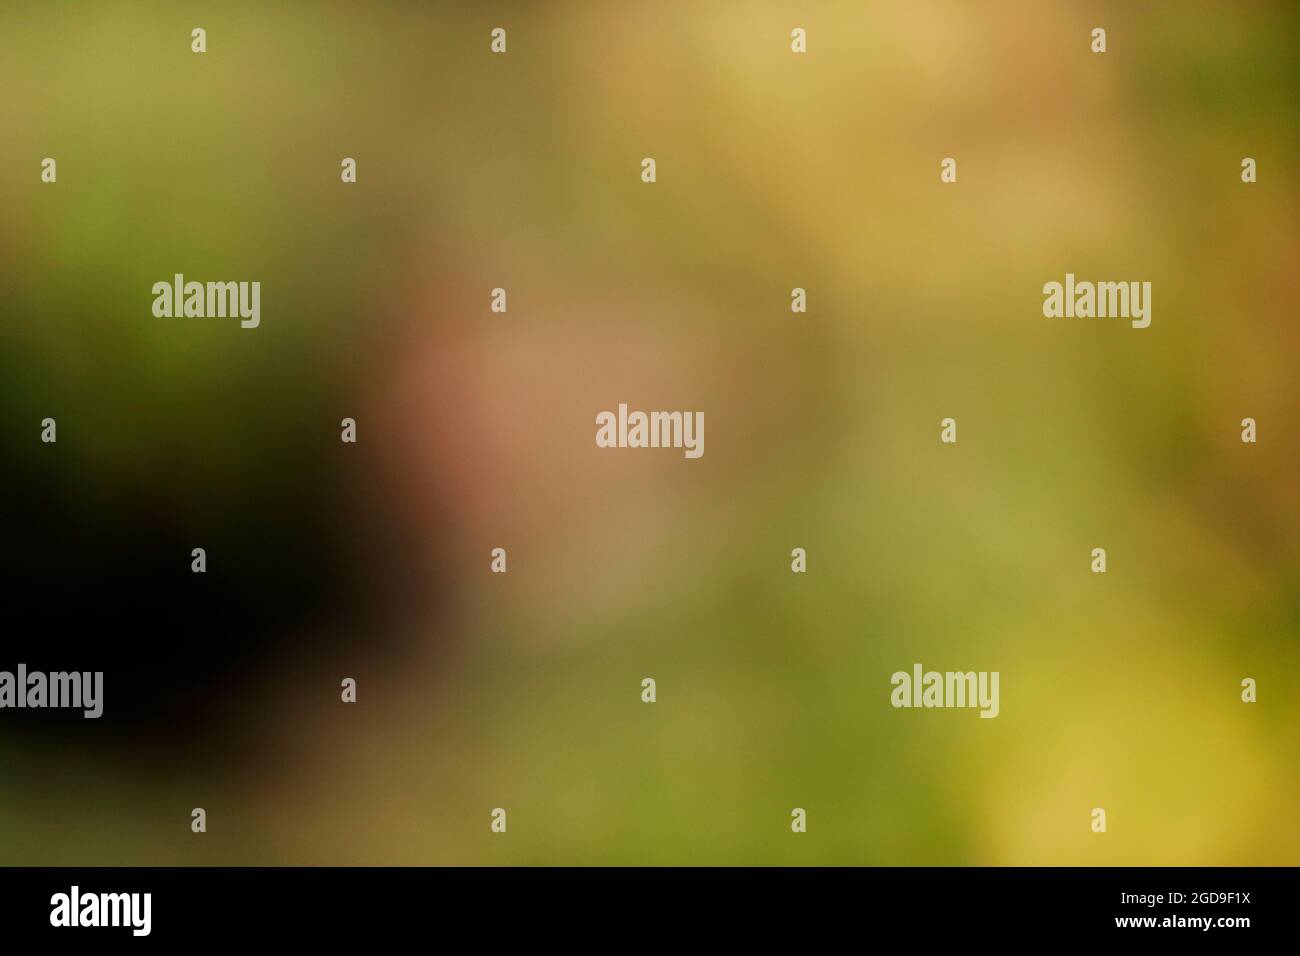 blurred horizontal background in green and brown tones Stock Photo